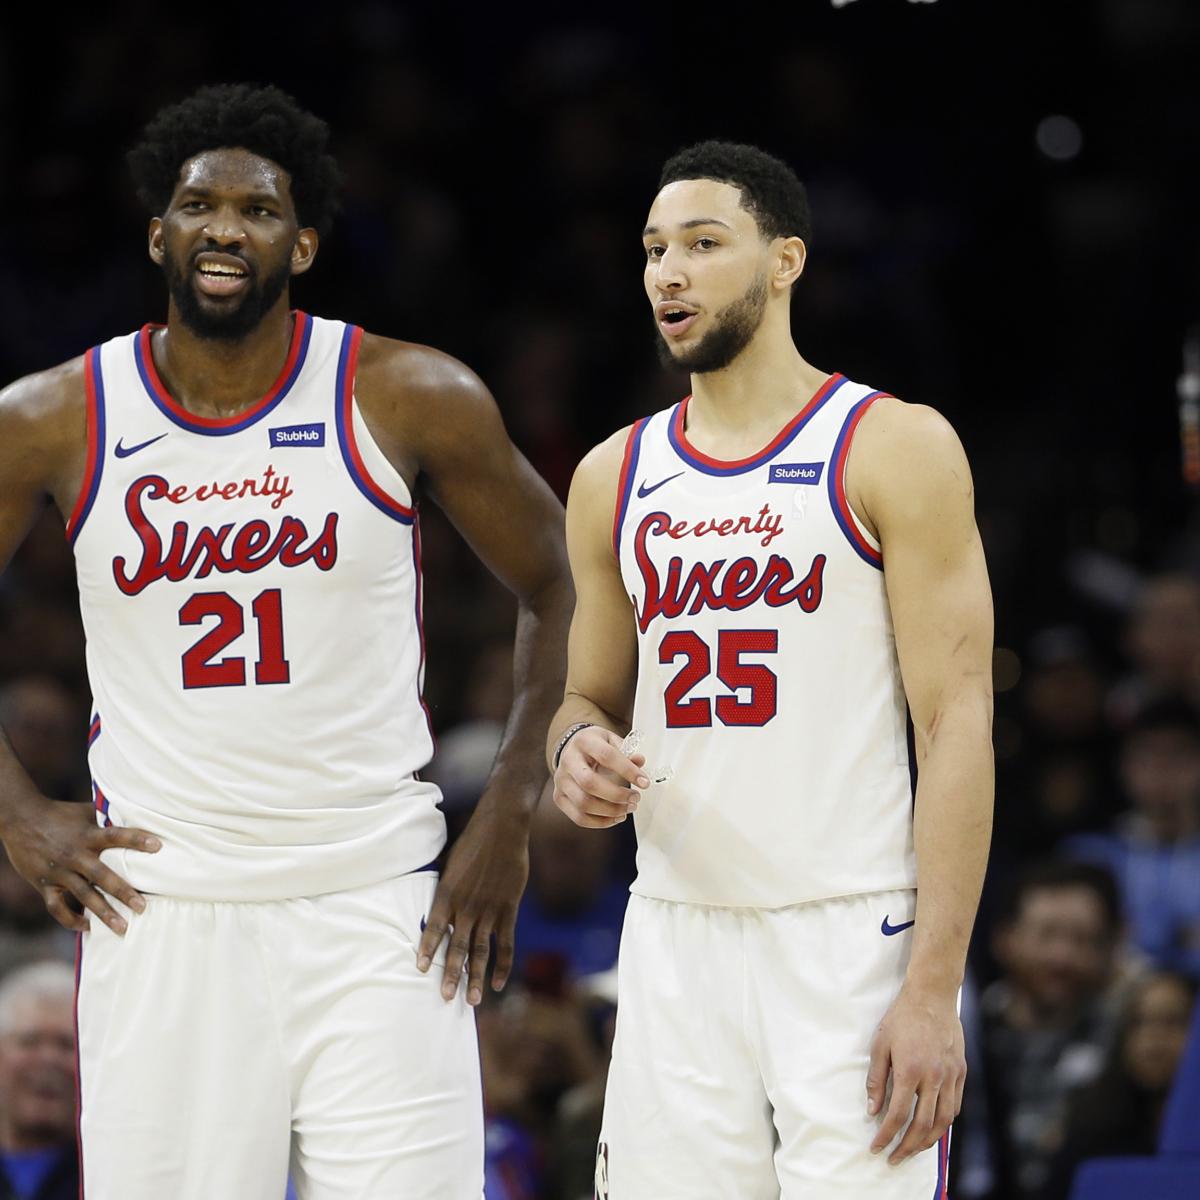 Joel Embiid Defends Ben Simmons’ Recreation on Twitter: ‘His Price Goes Beyond Stats’